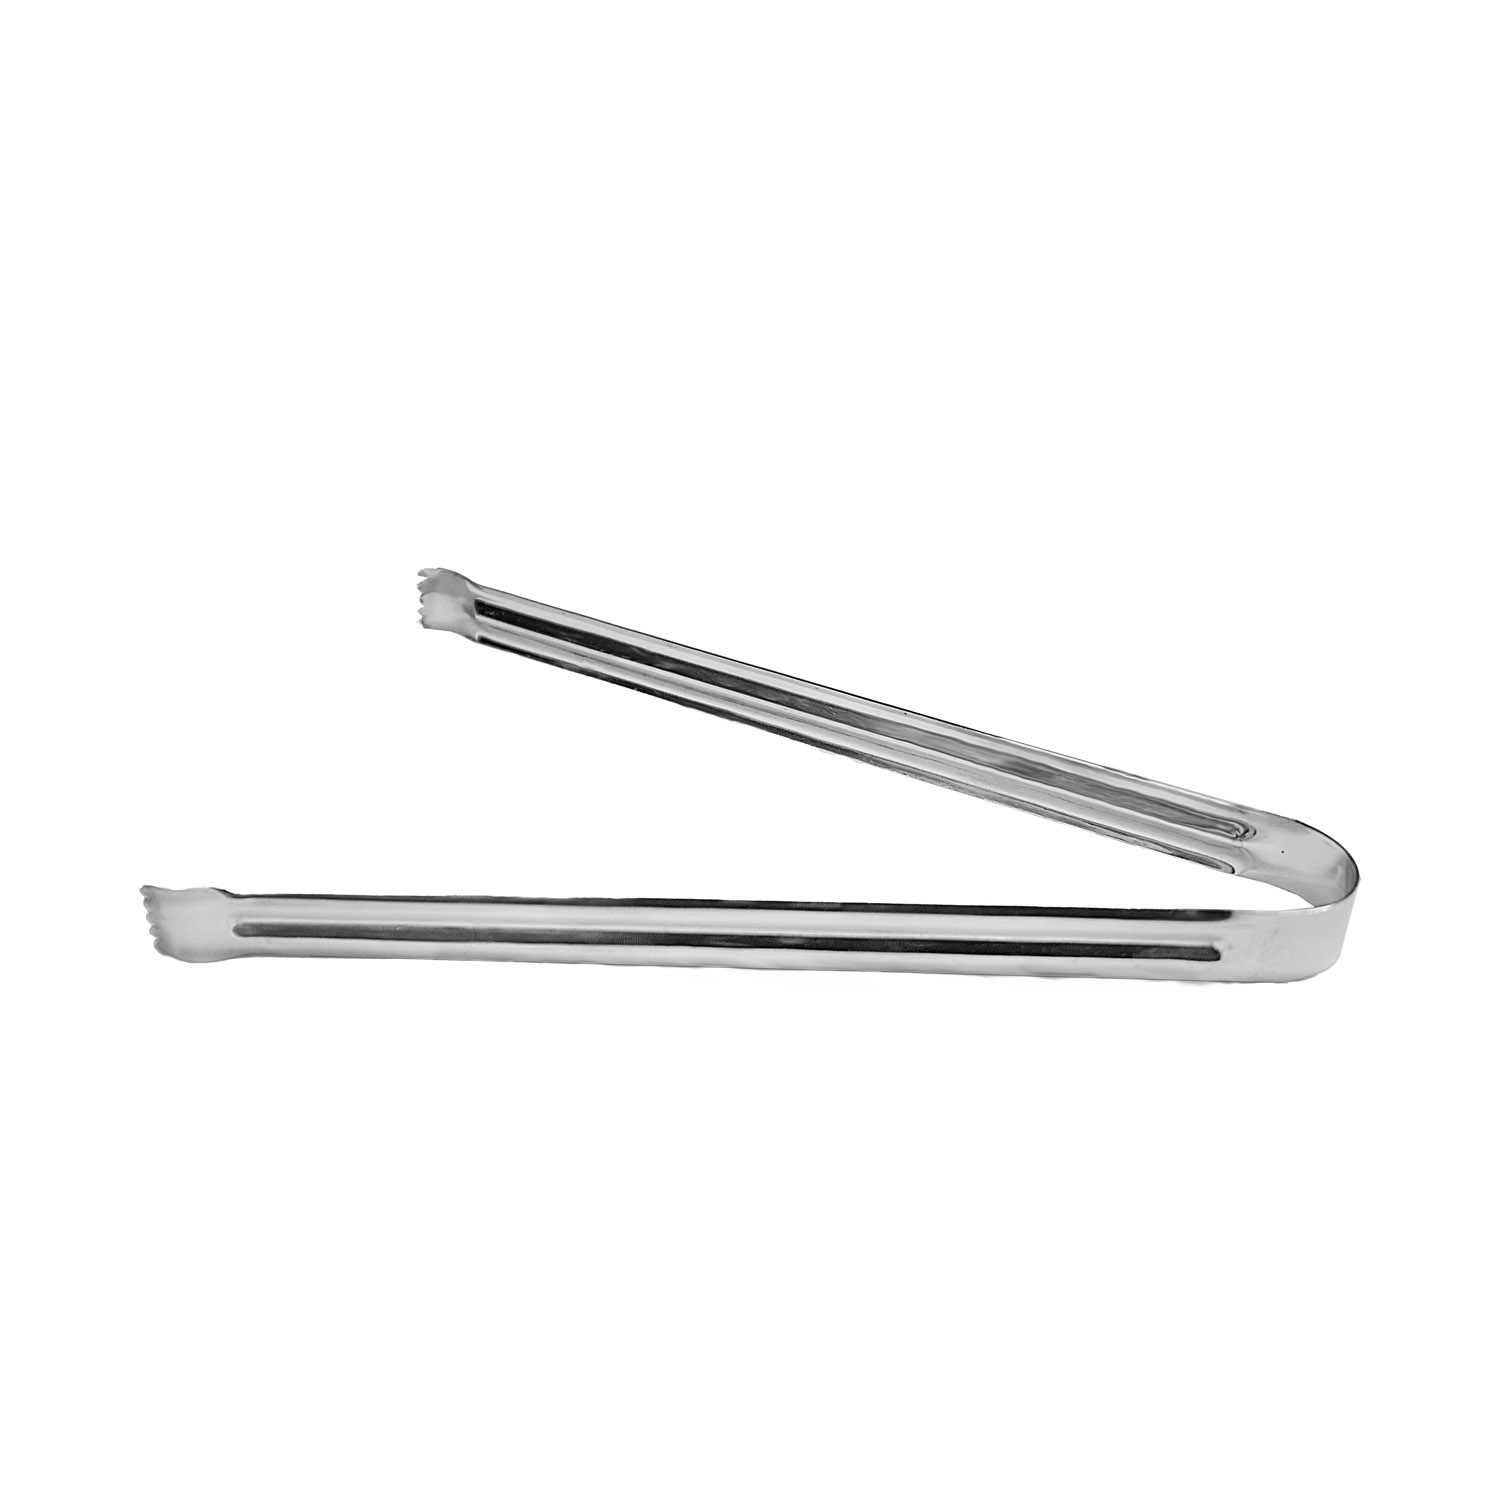 CAC China SPMT-9 Stainless Steel Pom Tongs 9"